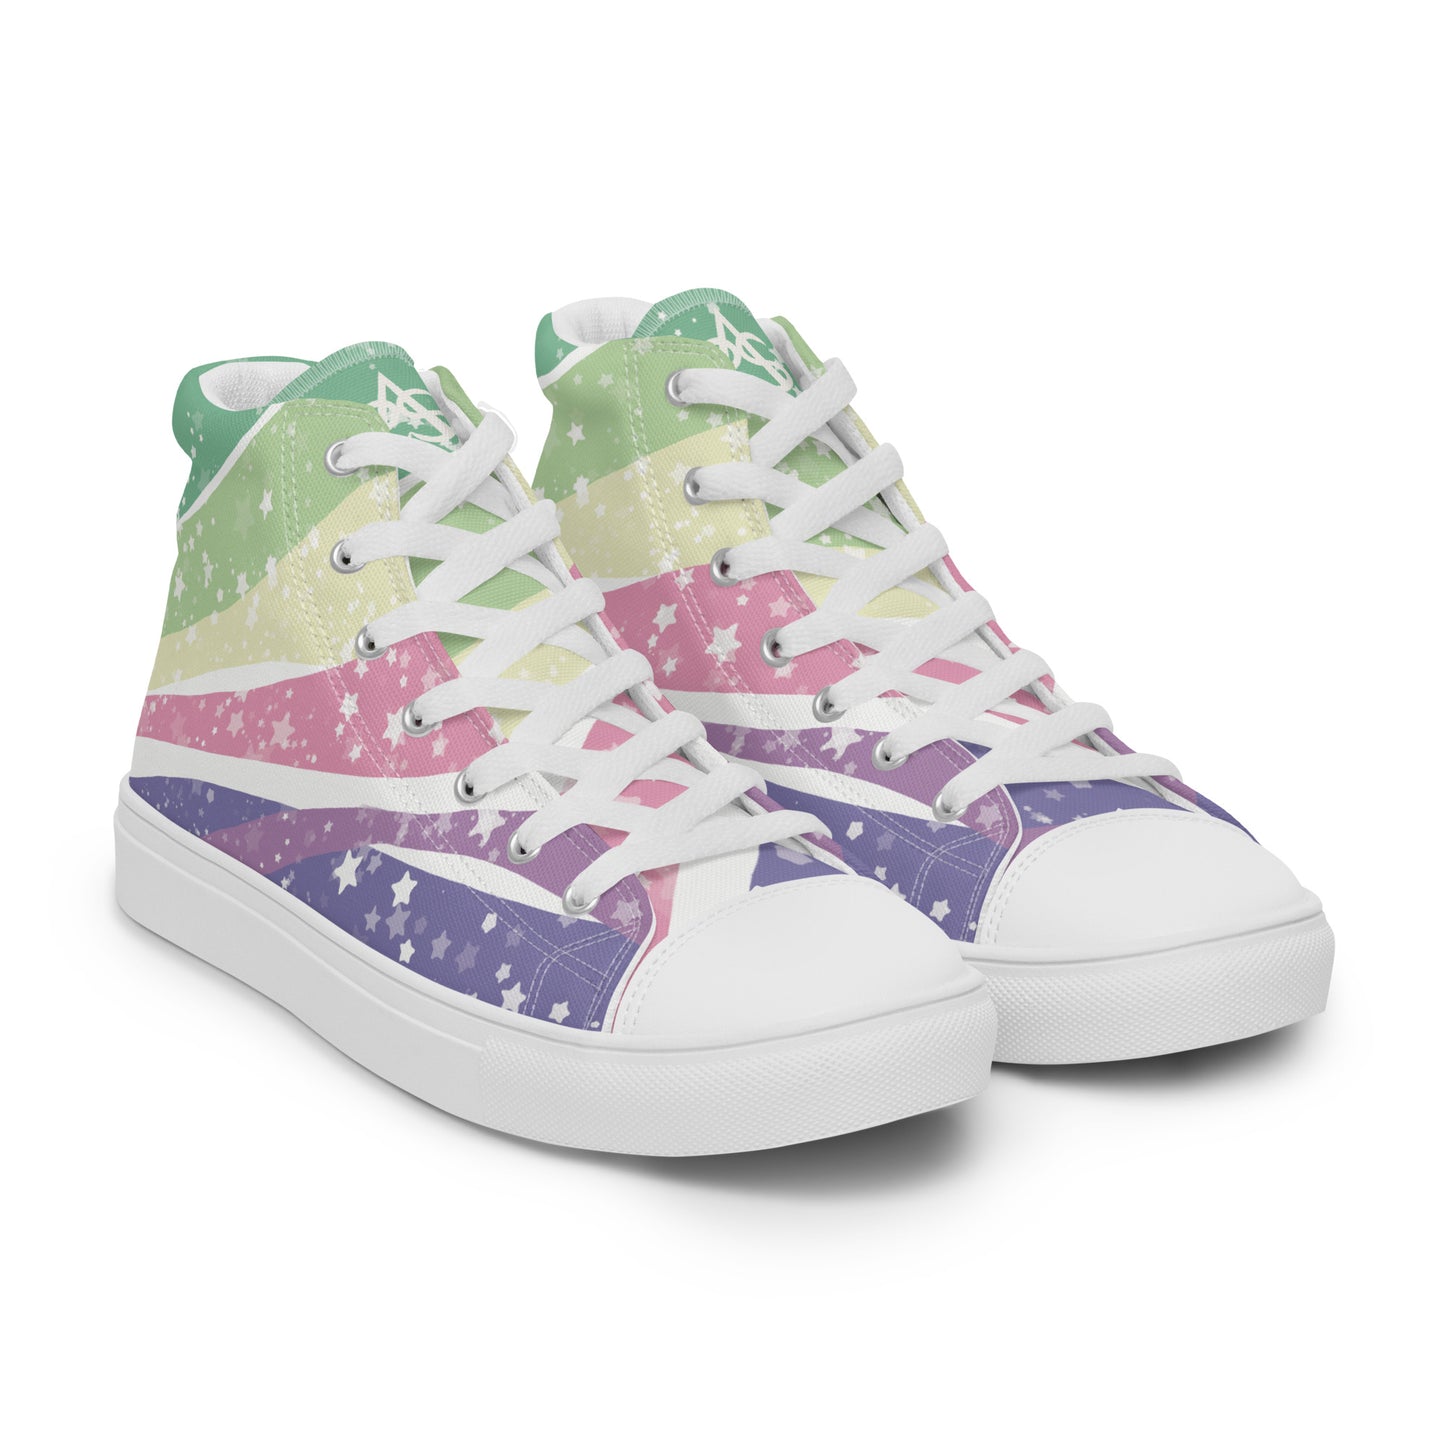 Starry Genderfae High Top Canvas Shoes (Masc Sizing)